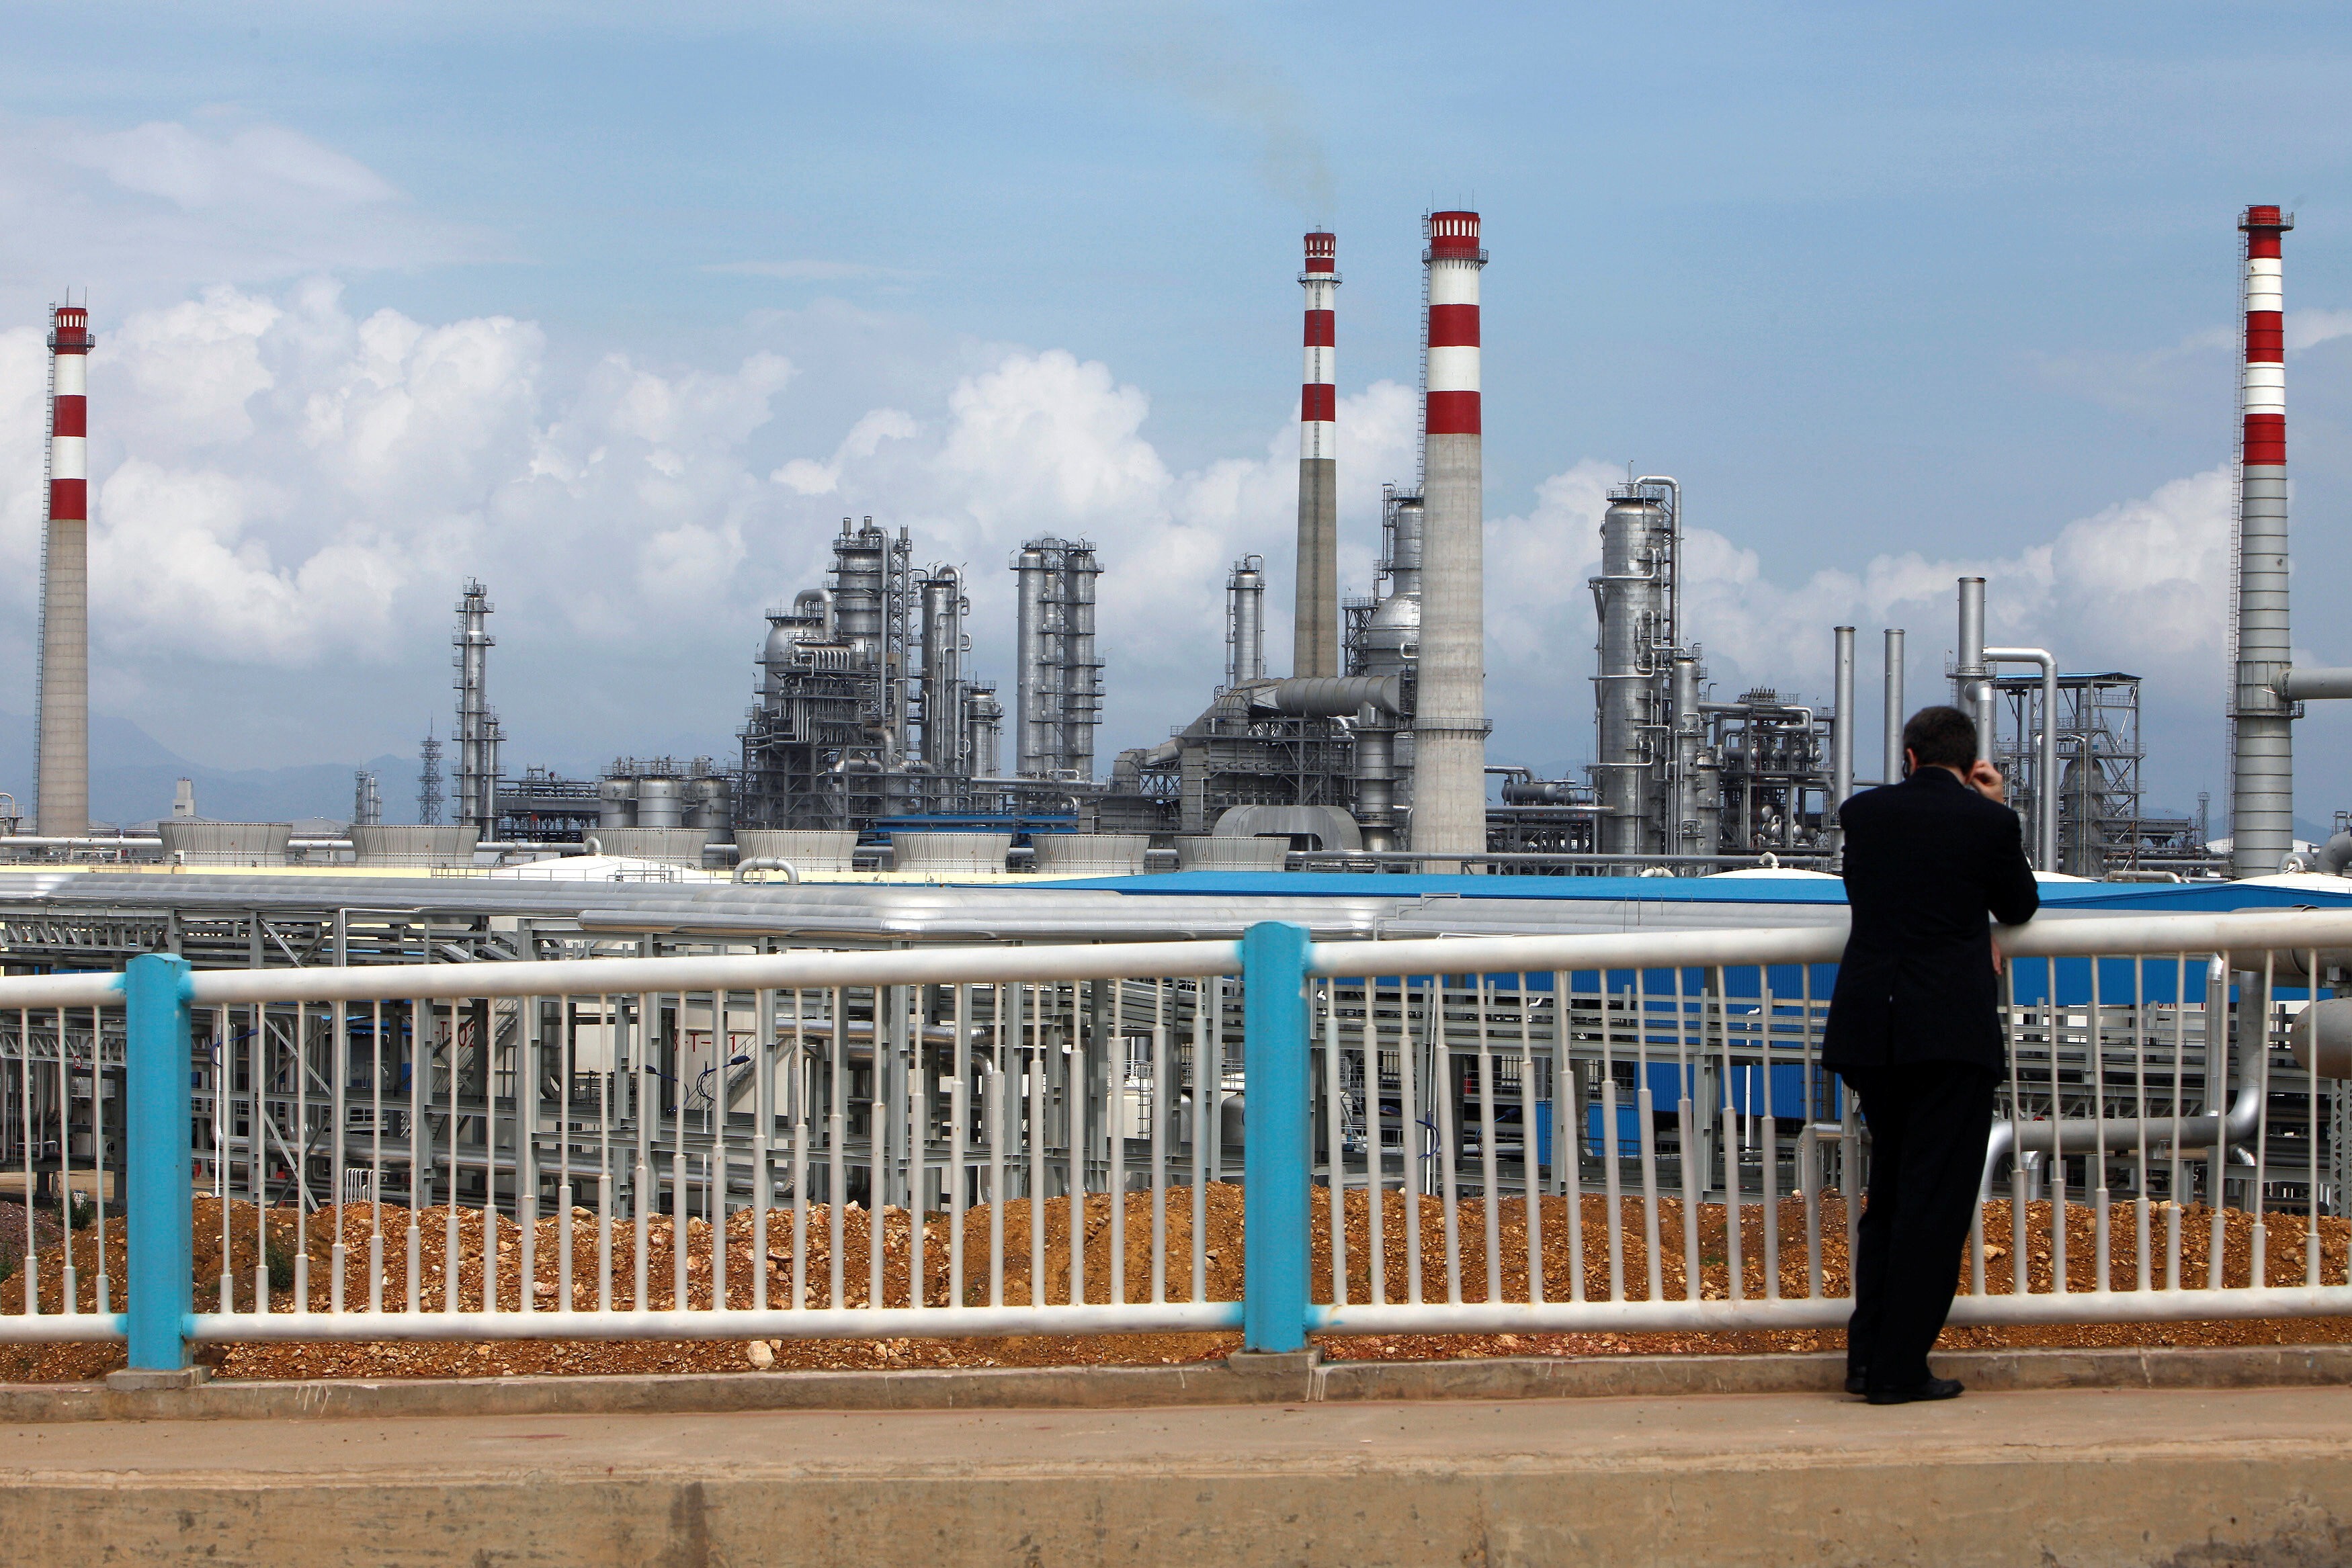 The China National Offshore Oil Corporation's (CNOOC) oil refinery in Huizhou. Petrochemicals is one of the pillars of the city’s economy. Photo: Reuters